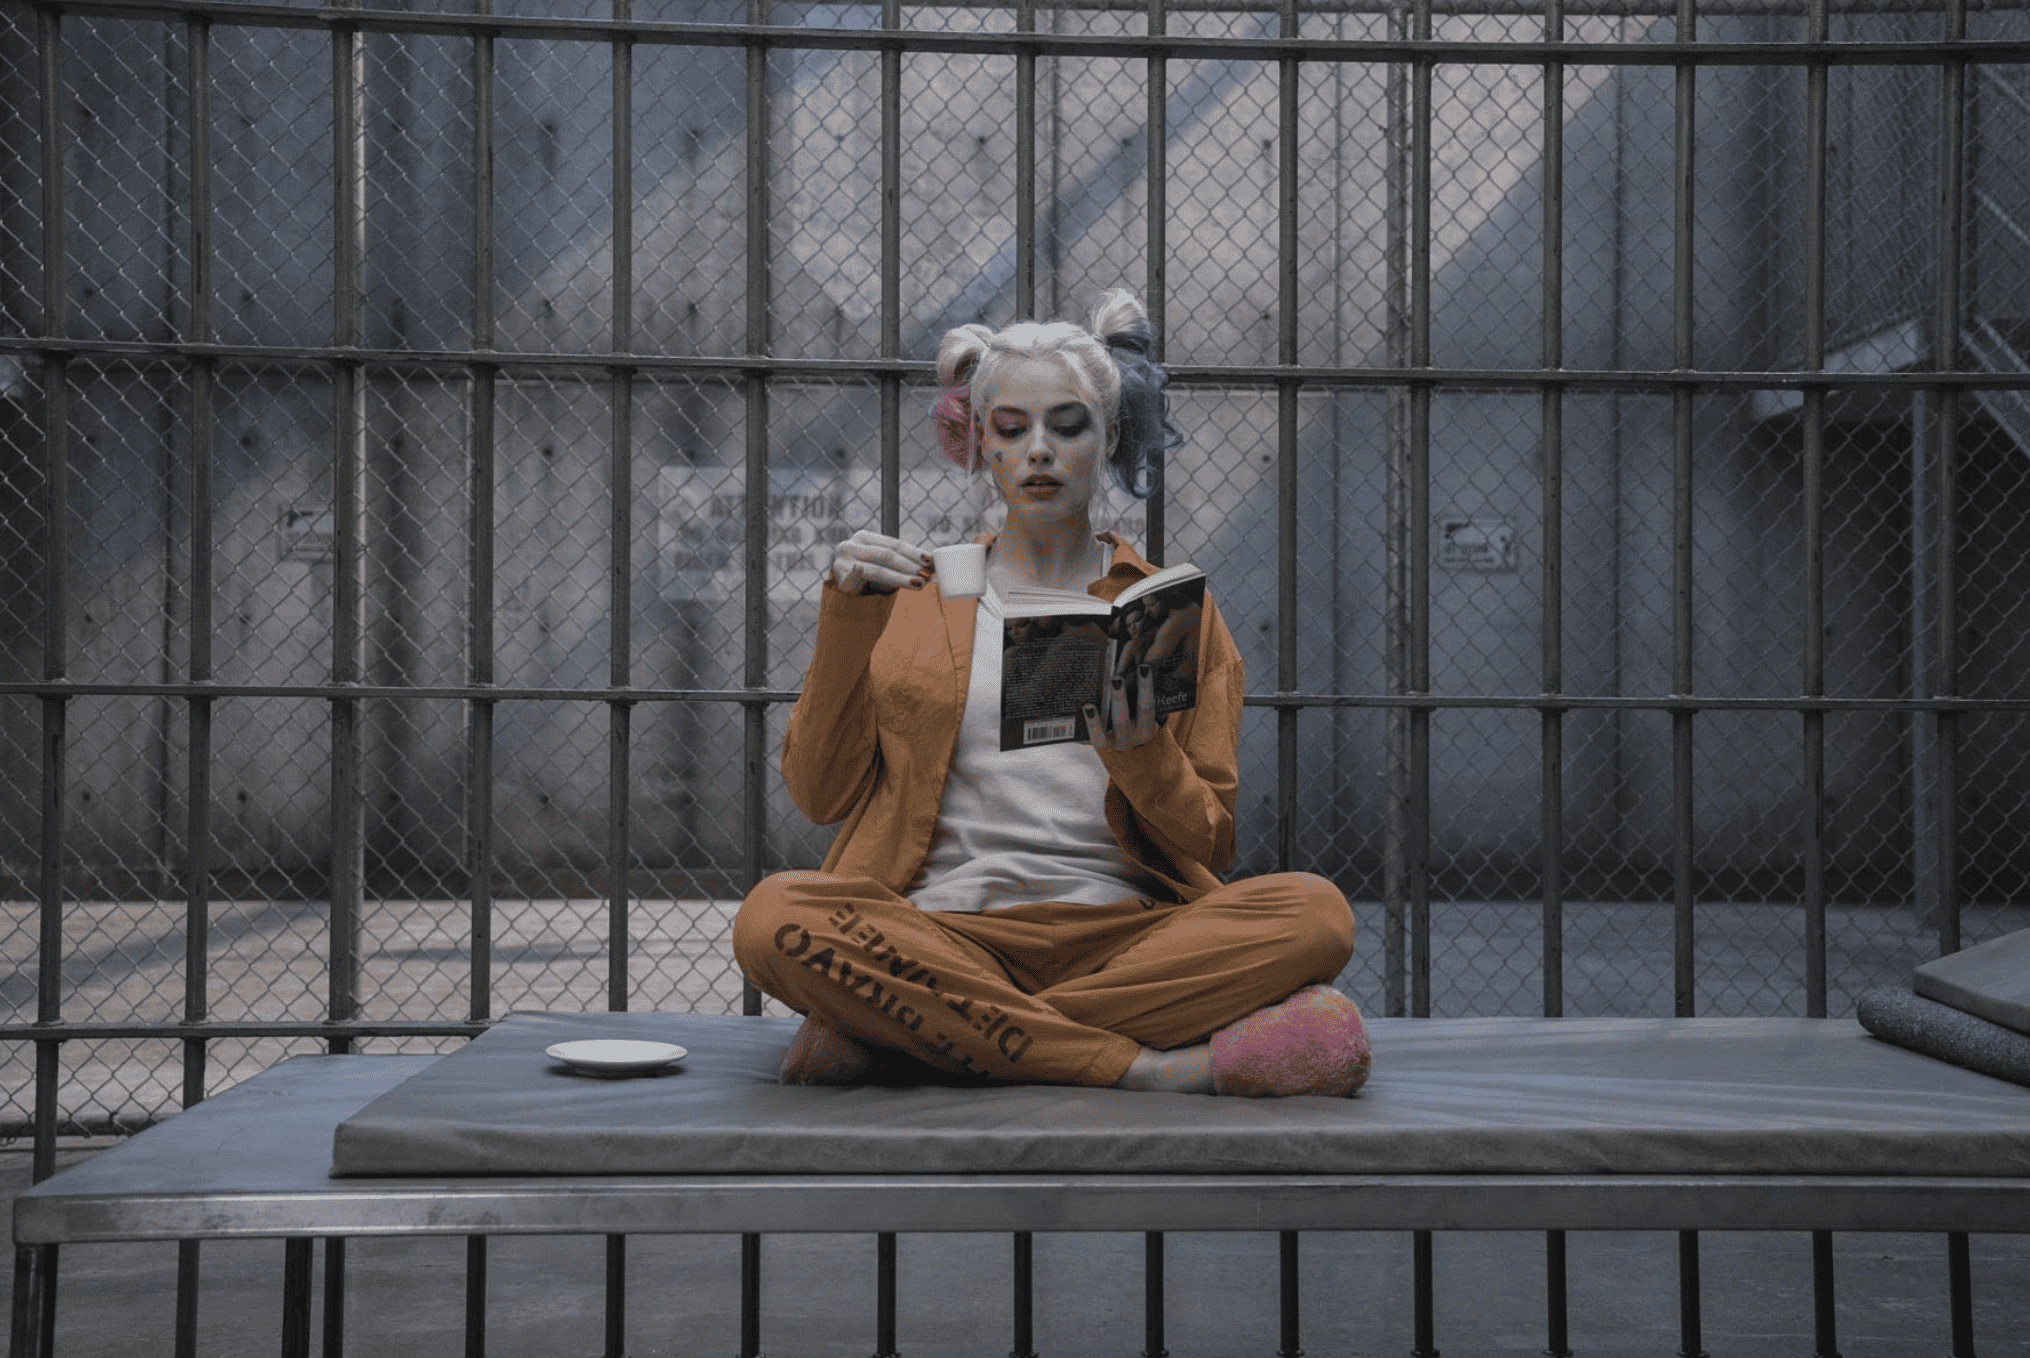 An female inmate sits with a book in this image from DC Entertainment